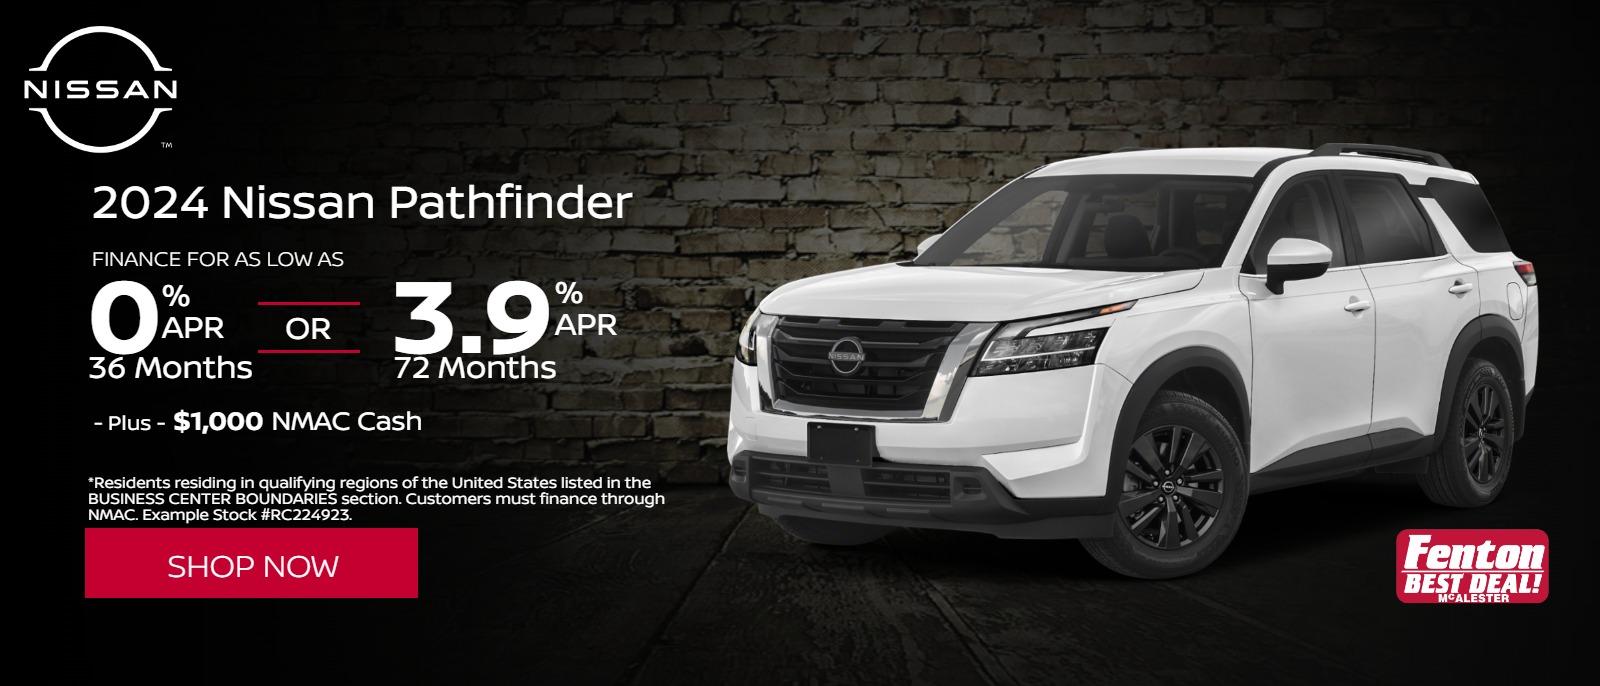 0% | or | 3.9% APR Financing available on 2024 Nissan Pathfinder + $1,000 NMAC Cash
*Residents residing in qualifying regions of the United States listed in the BUSINESS CENTER BOUNDARIES section. Customers must finance through NMAC